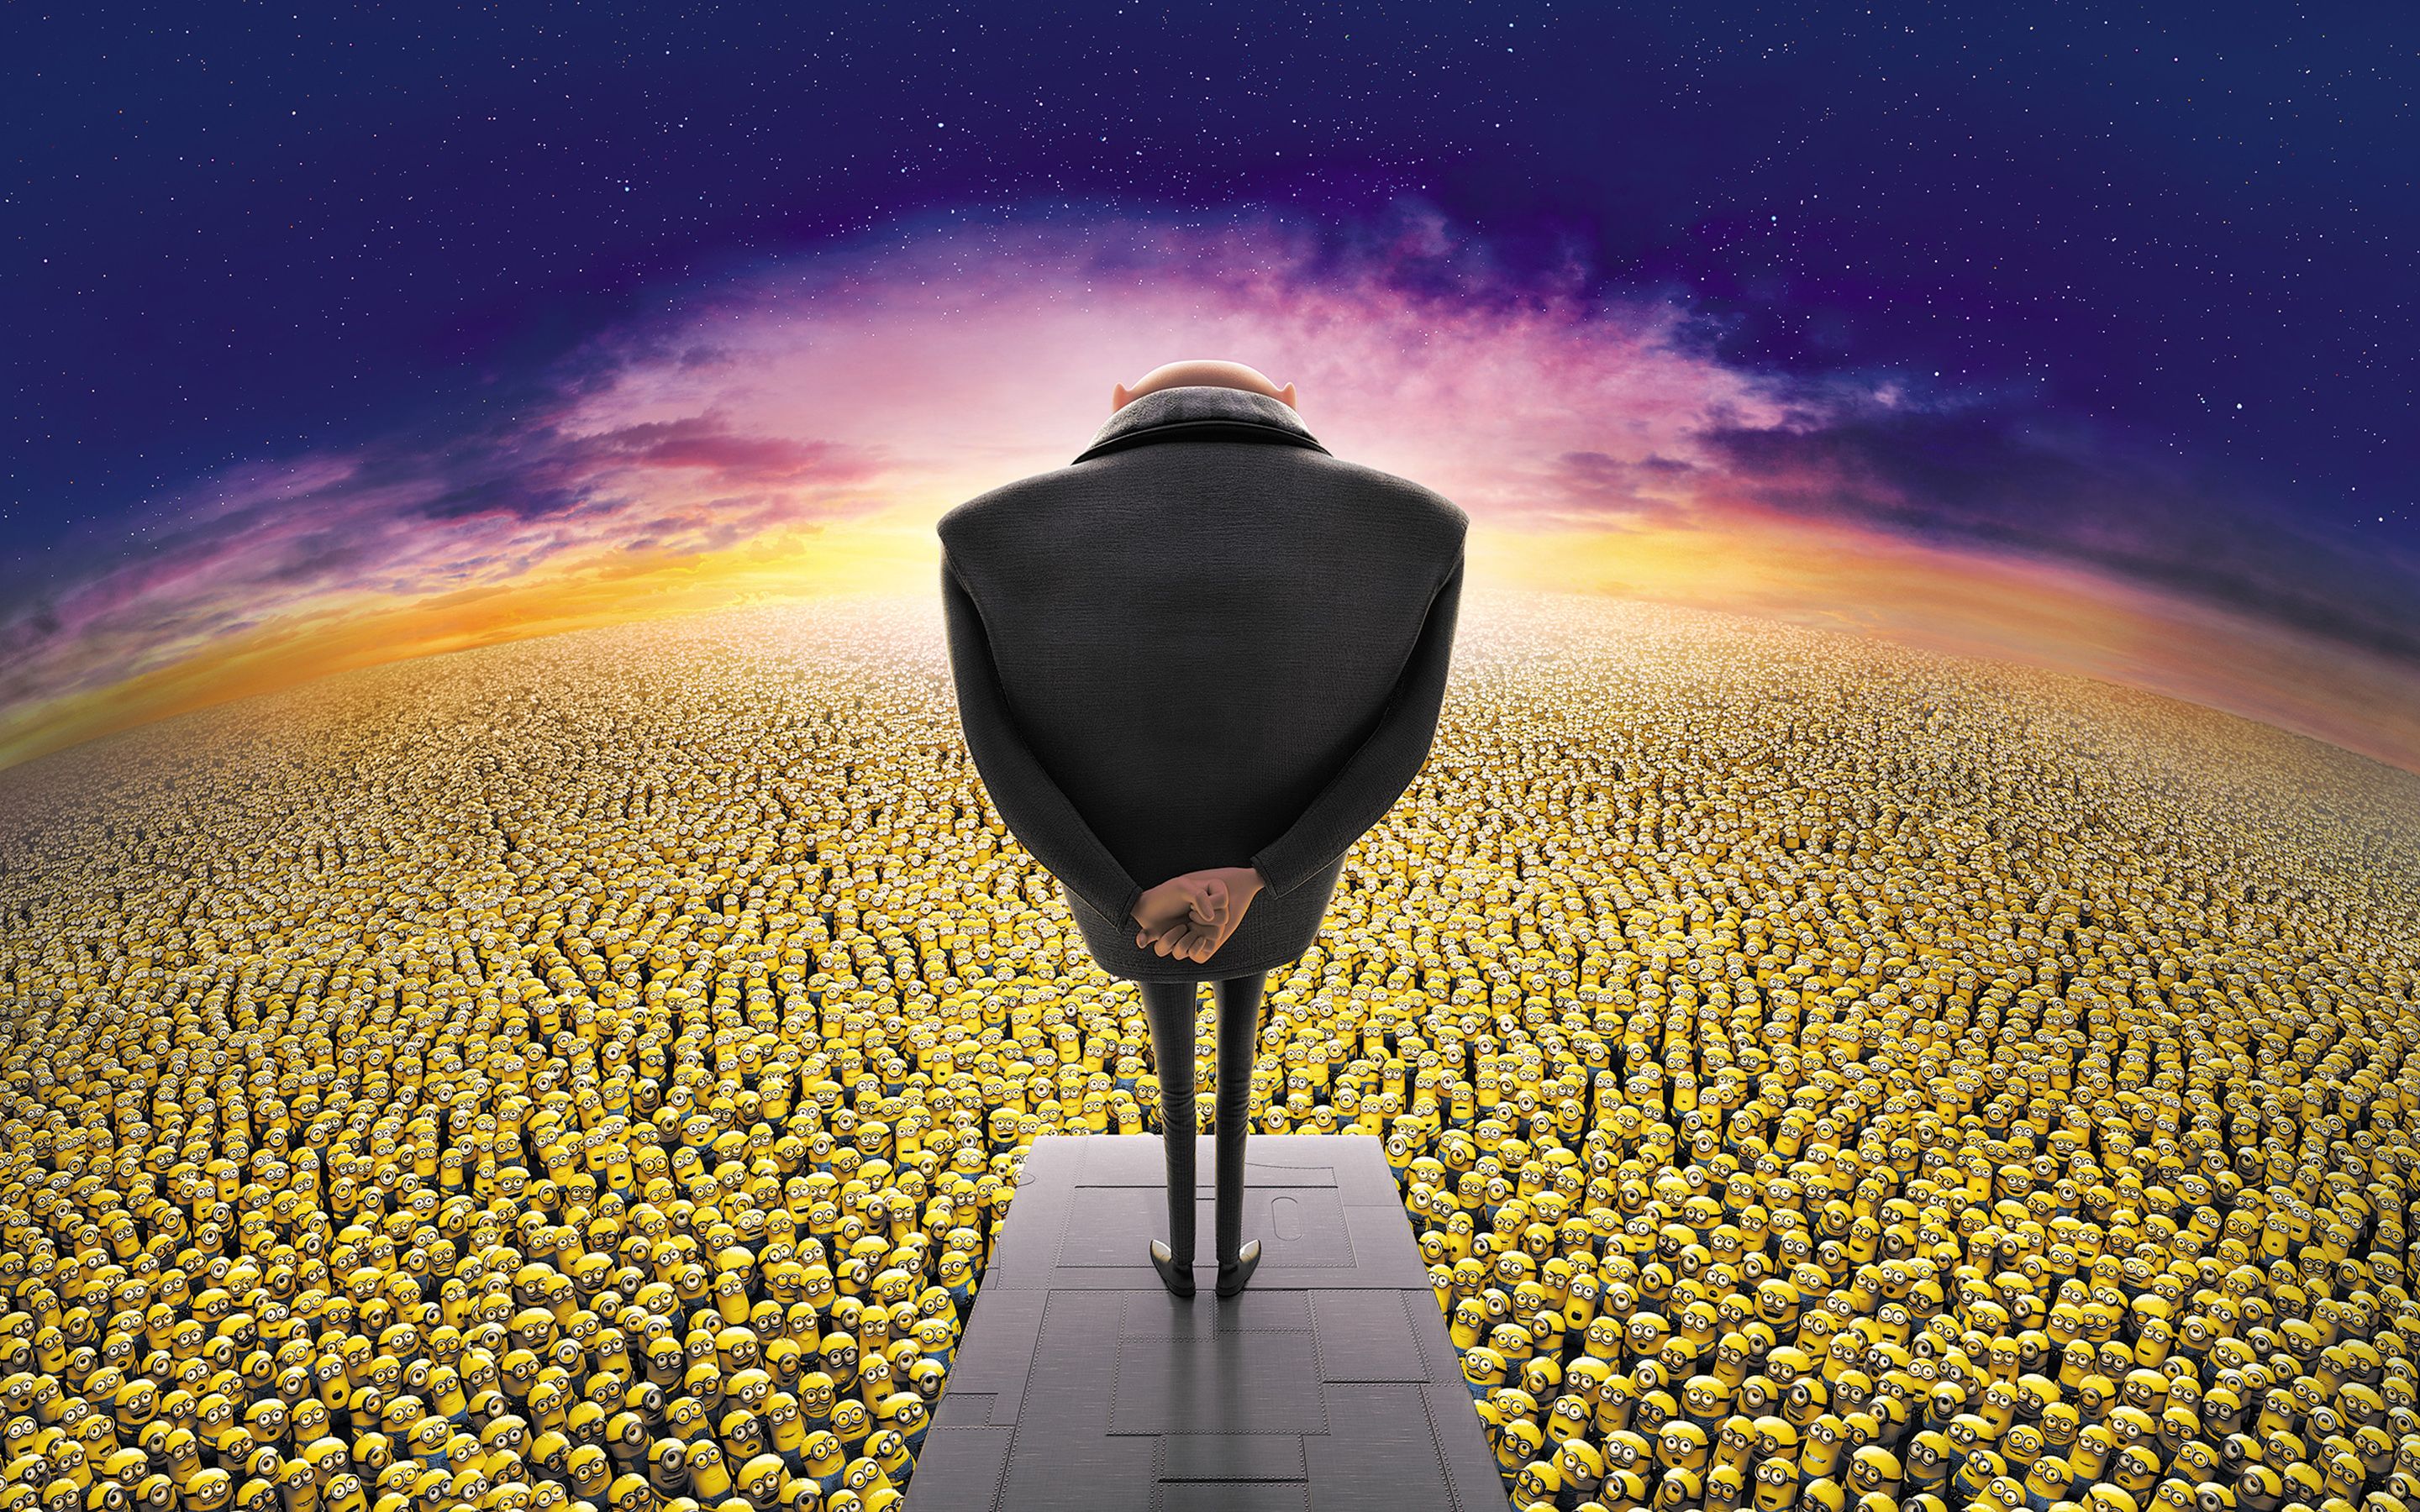 Despicable Me 2 Minions Pictures, Movie Wallpapers & Facebook ...